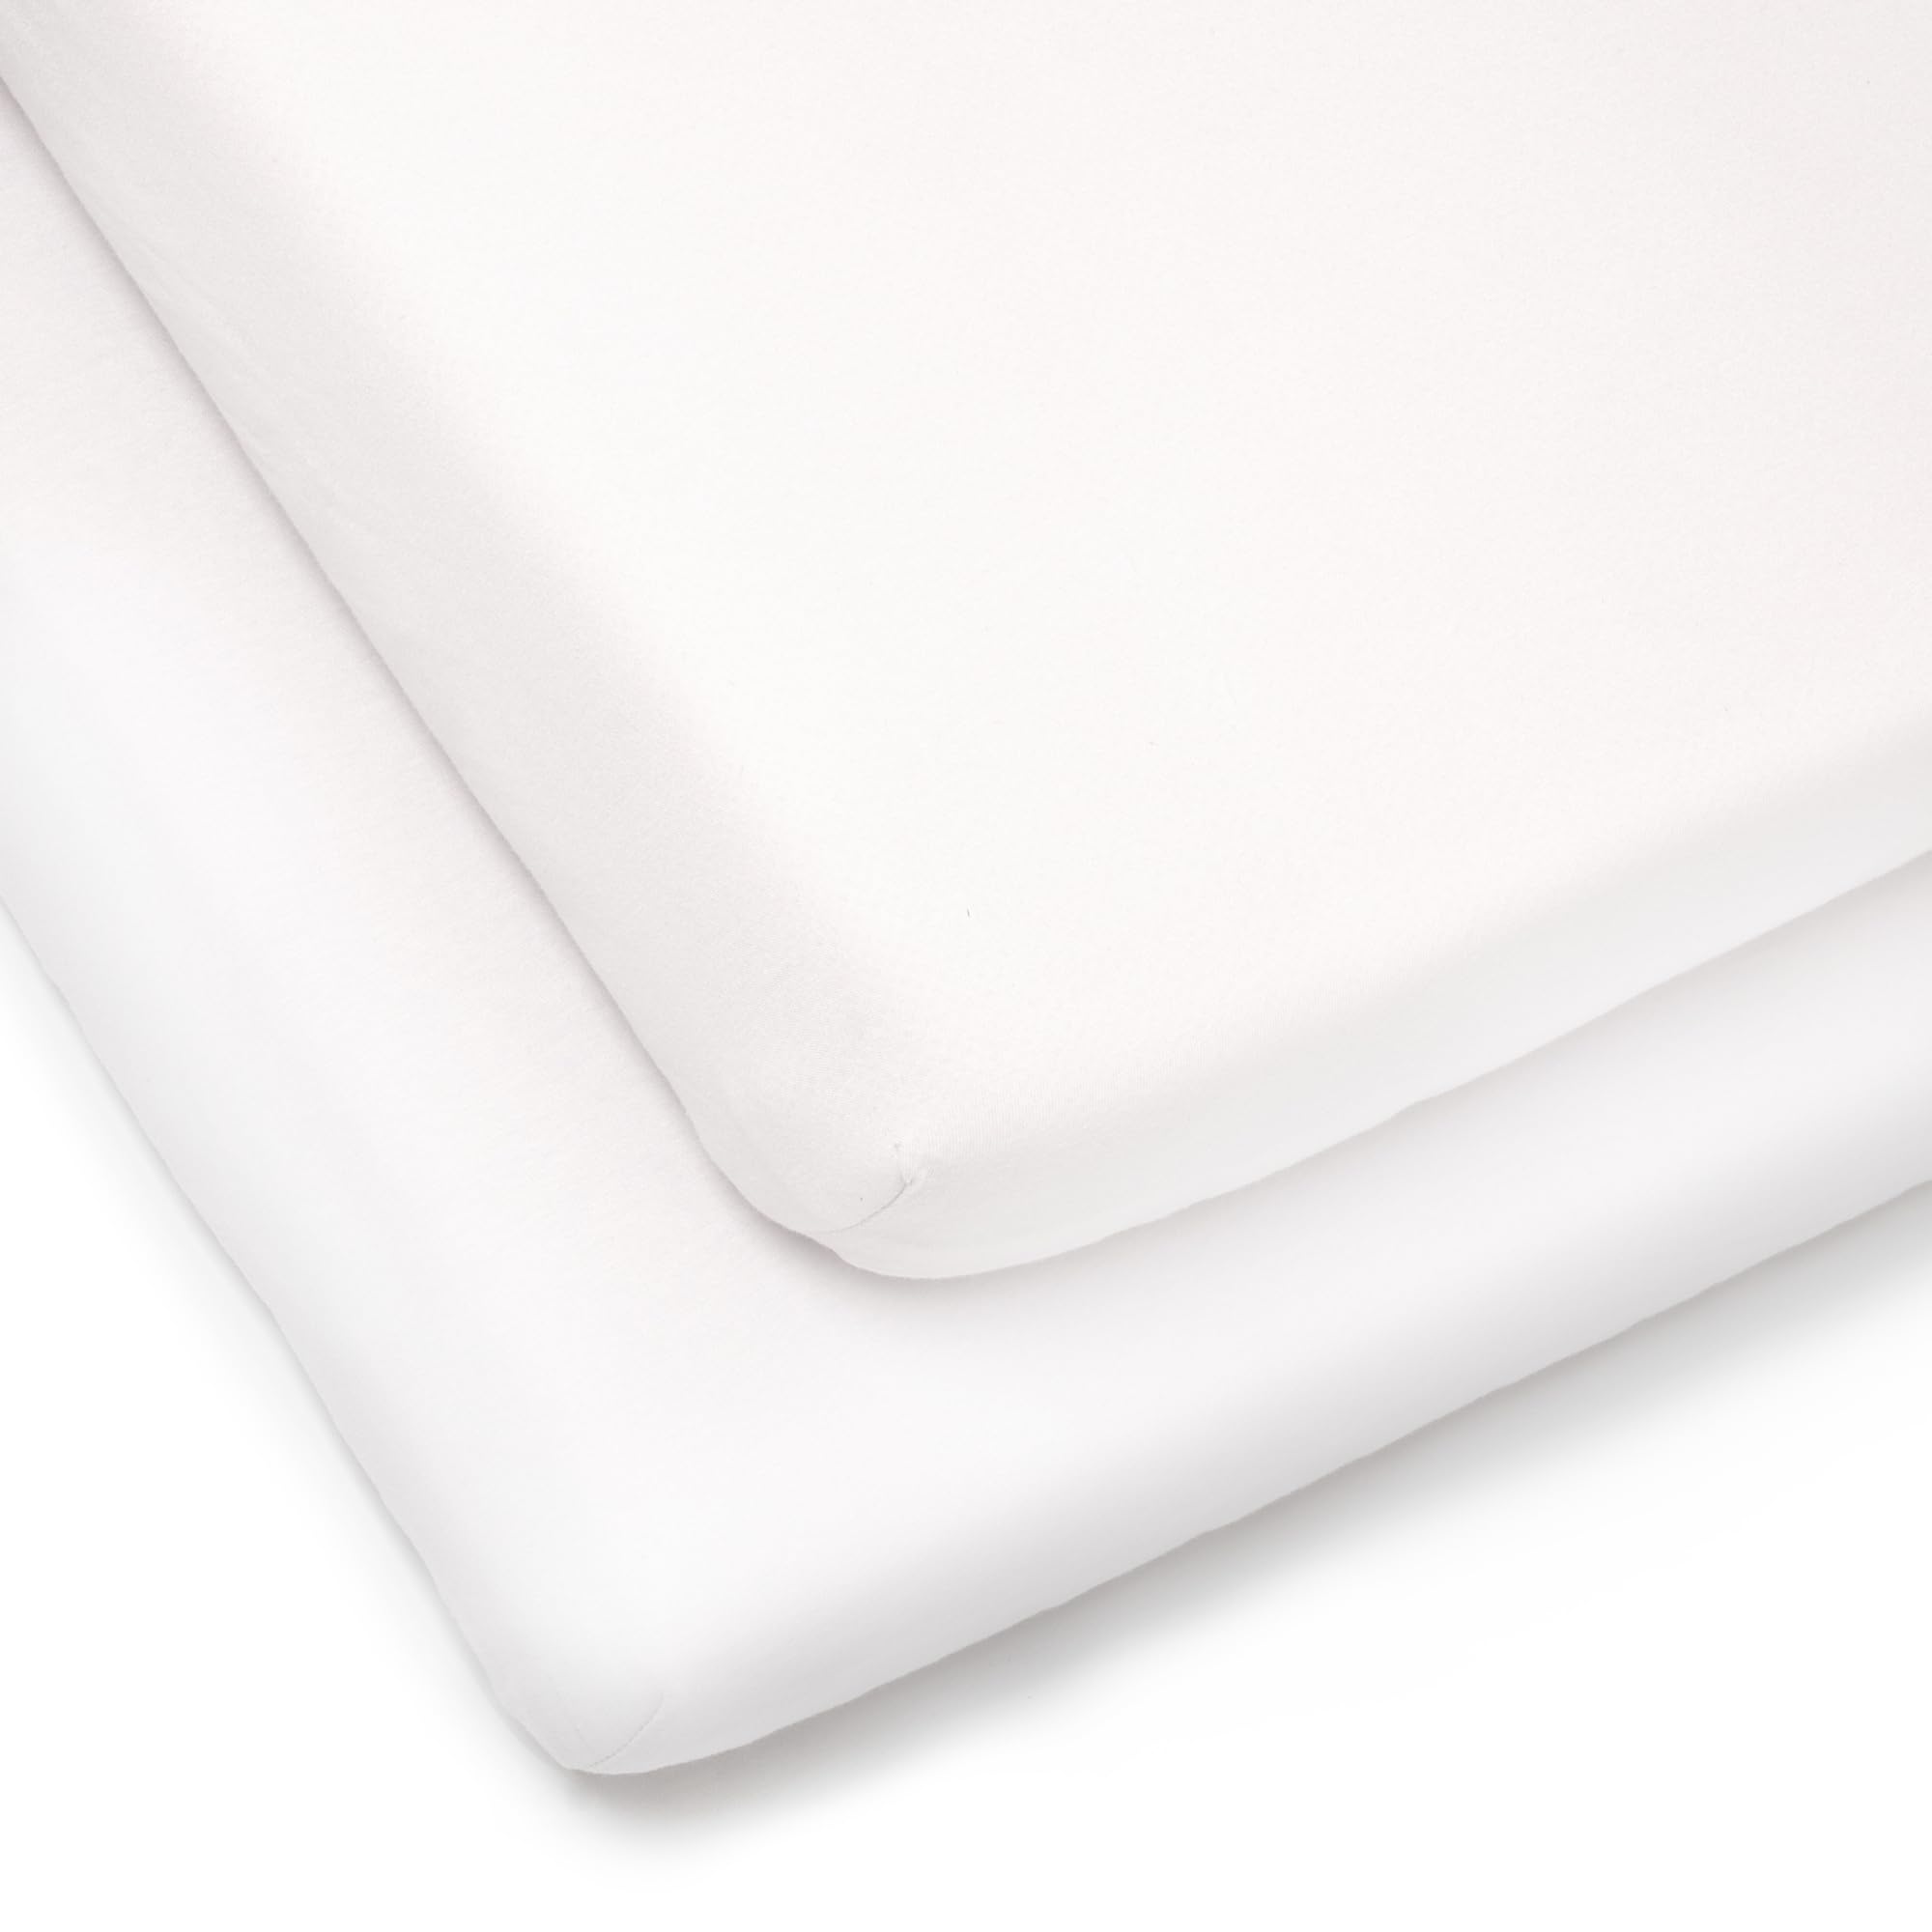 Clair de Lune Pram/ Crib Cotton Jersey Fitted Sheets (Pack of 2, White)